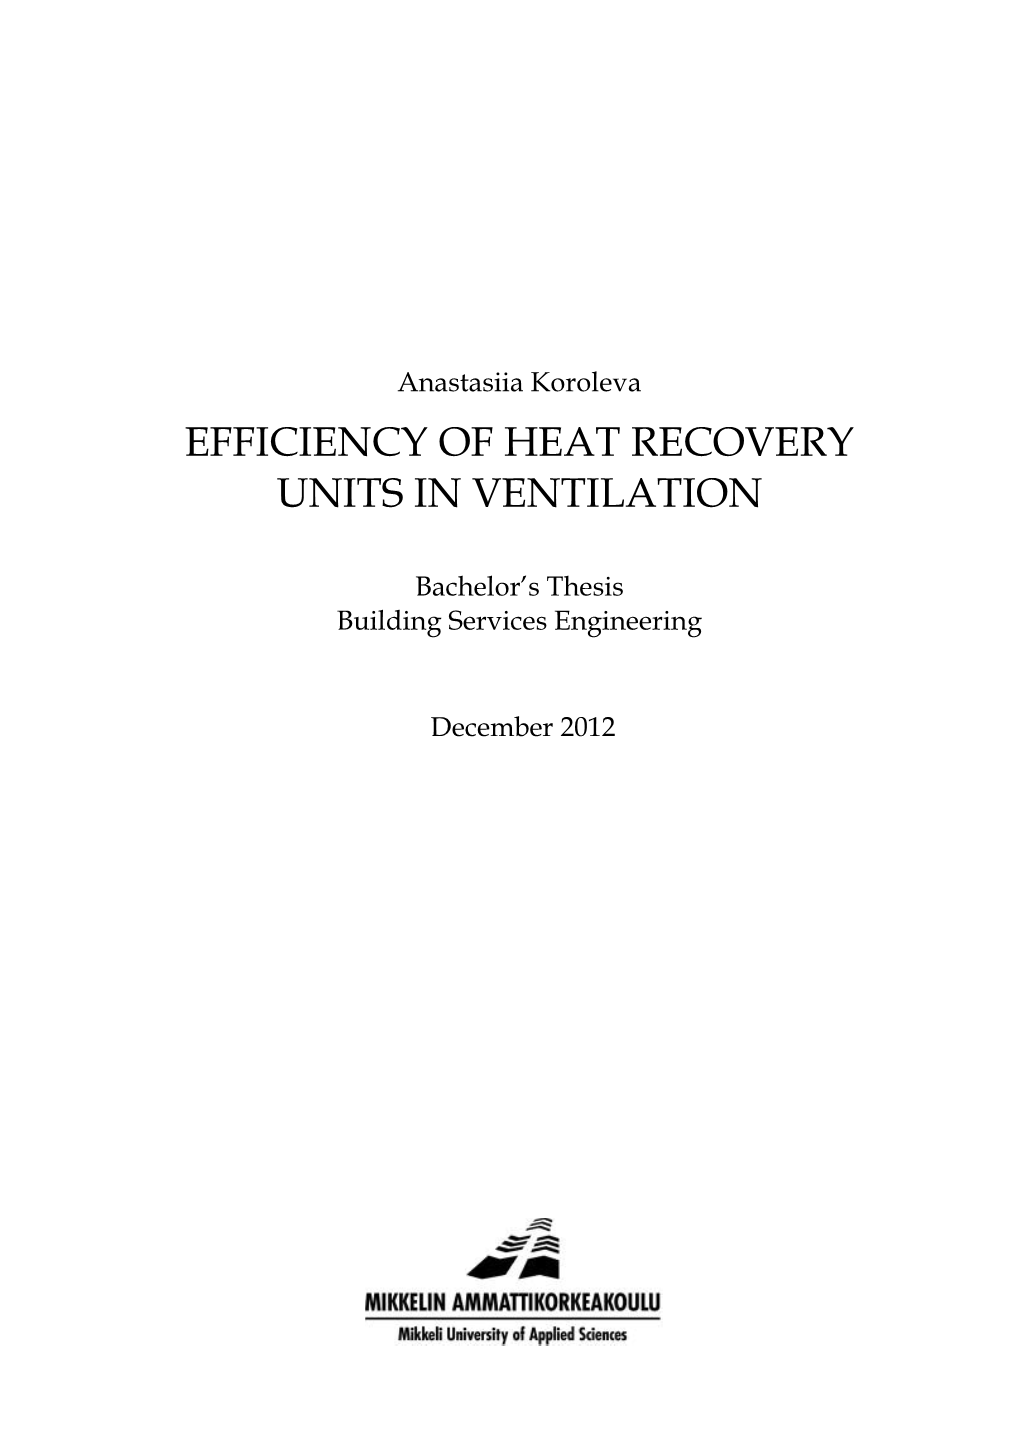 Efficiency of Heat Recovery Units in Ventilation